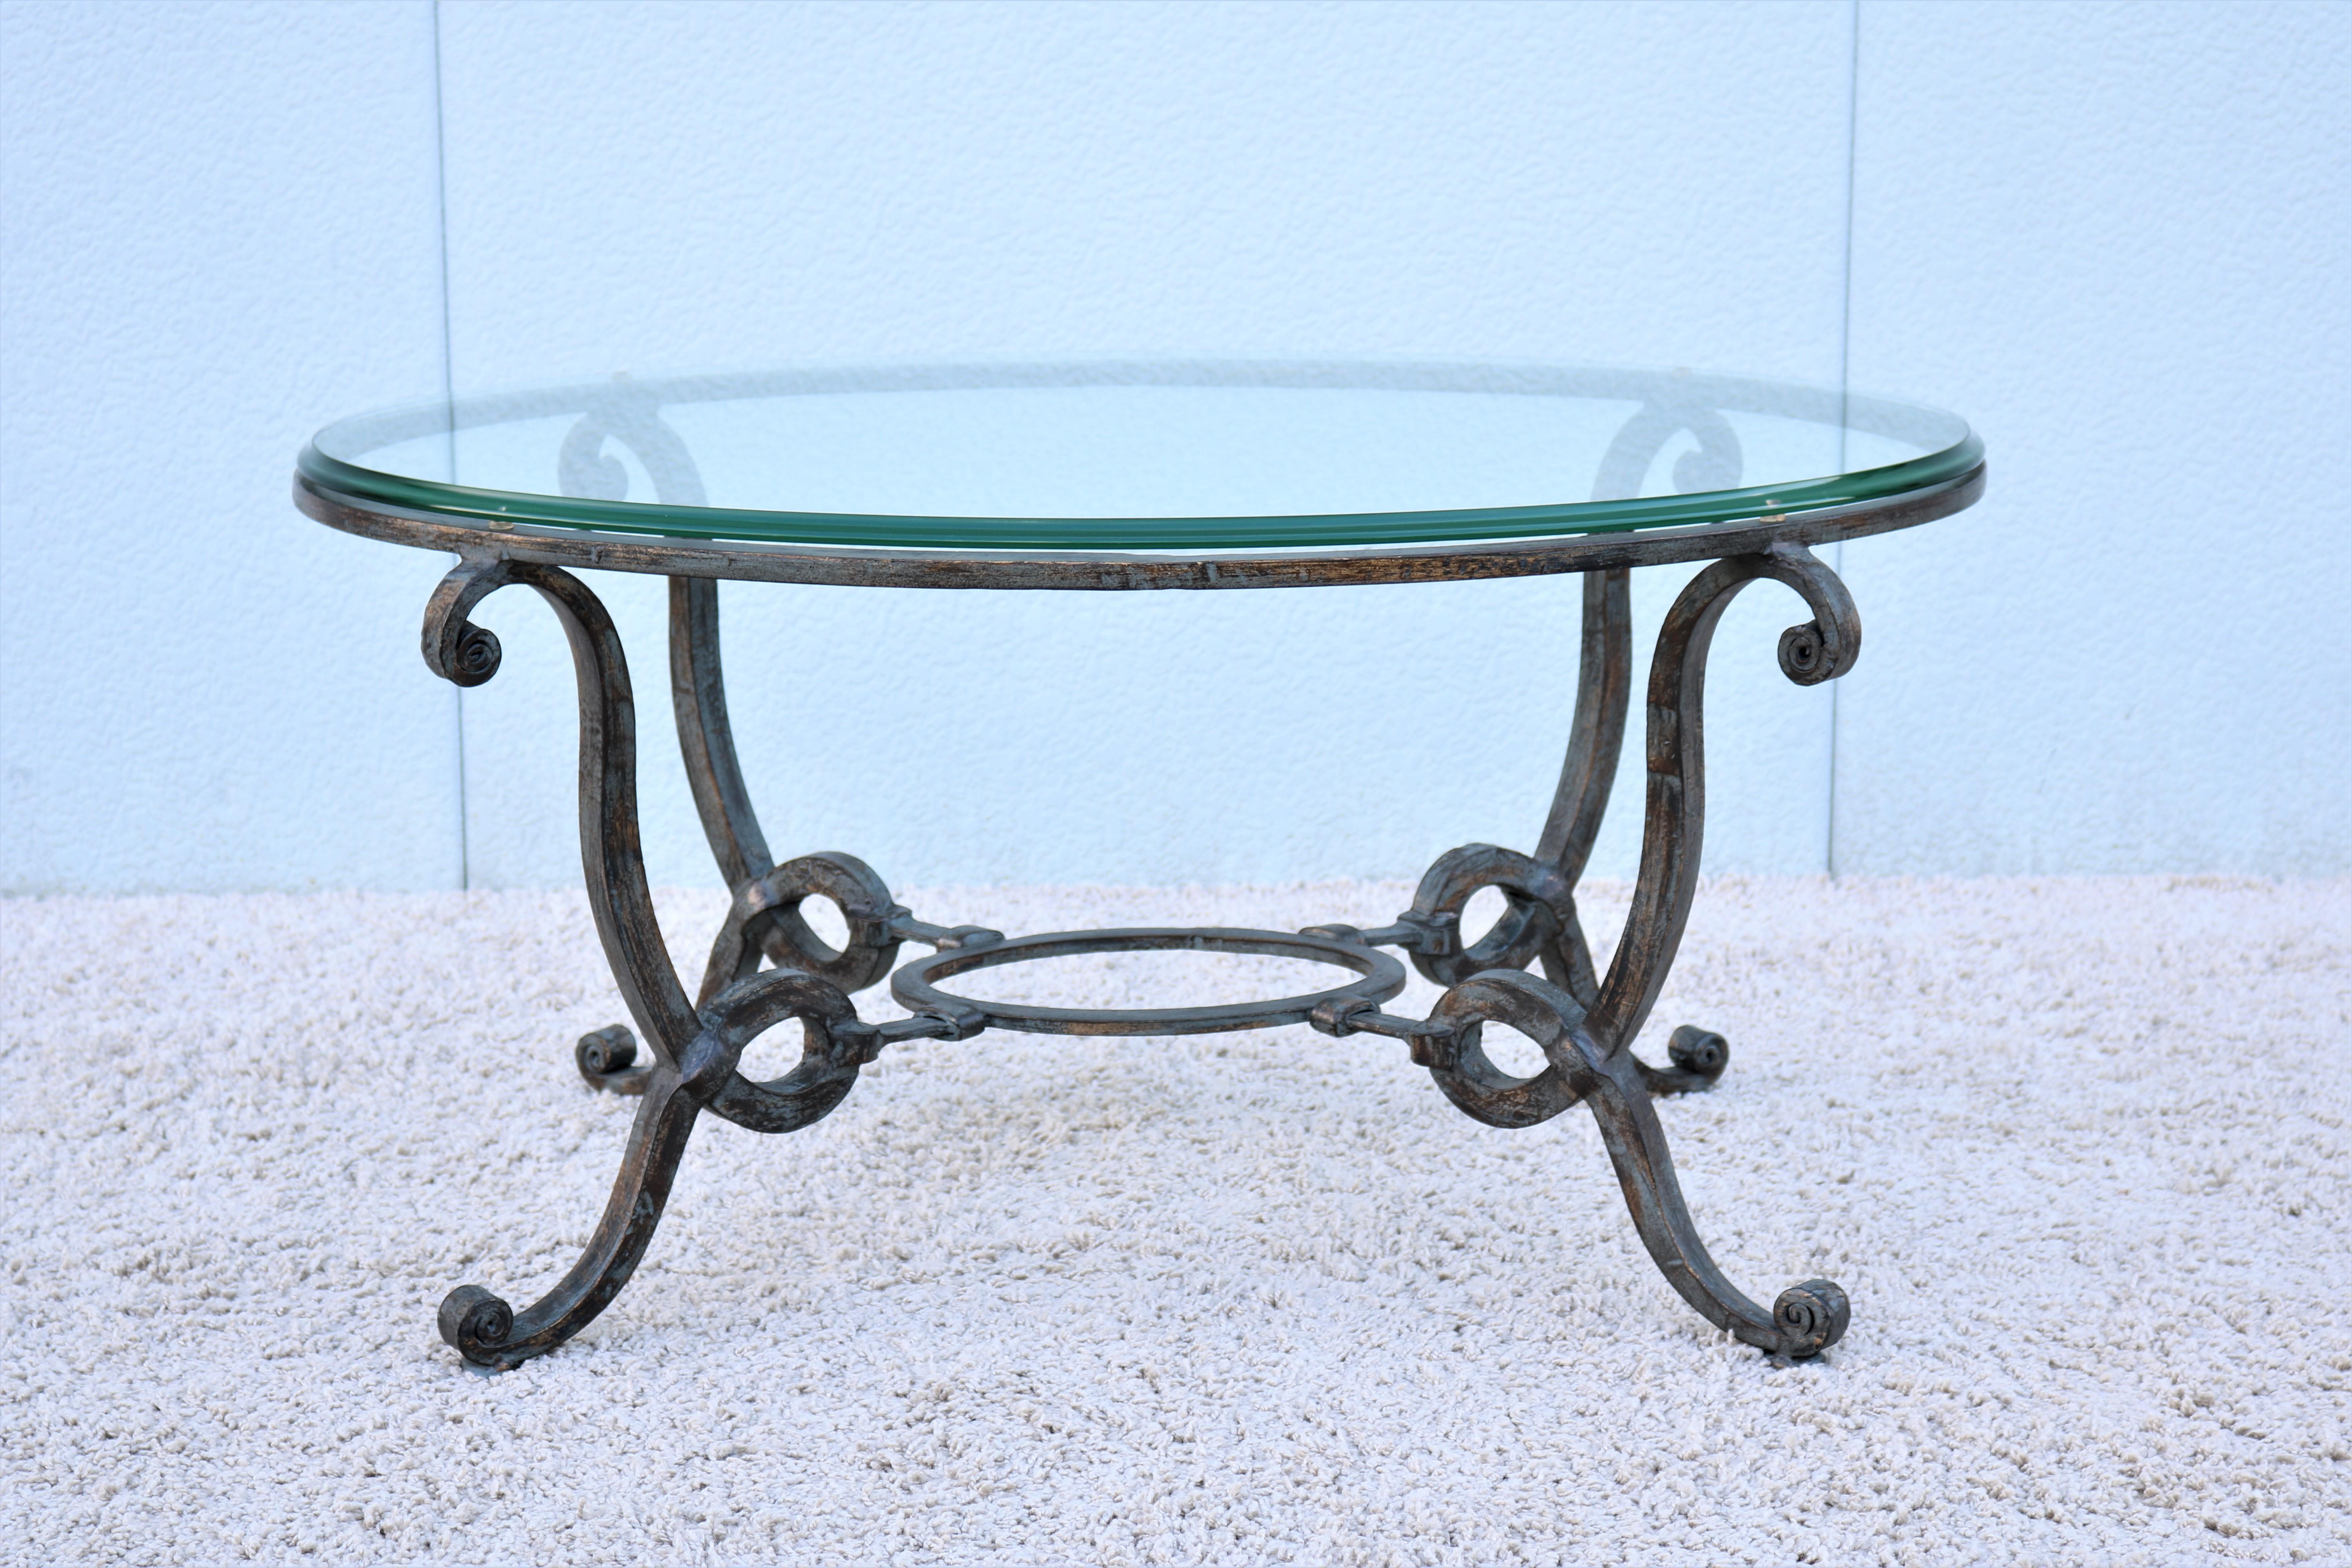 Gorgeous 1980s French wrought iron oval coffee table with beveled glass top.
Features a hand forged iron base with classic scrolls and rust distressed finish.
The French design brings charming historic Old-World elements into your room.

Dimensions: